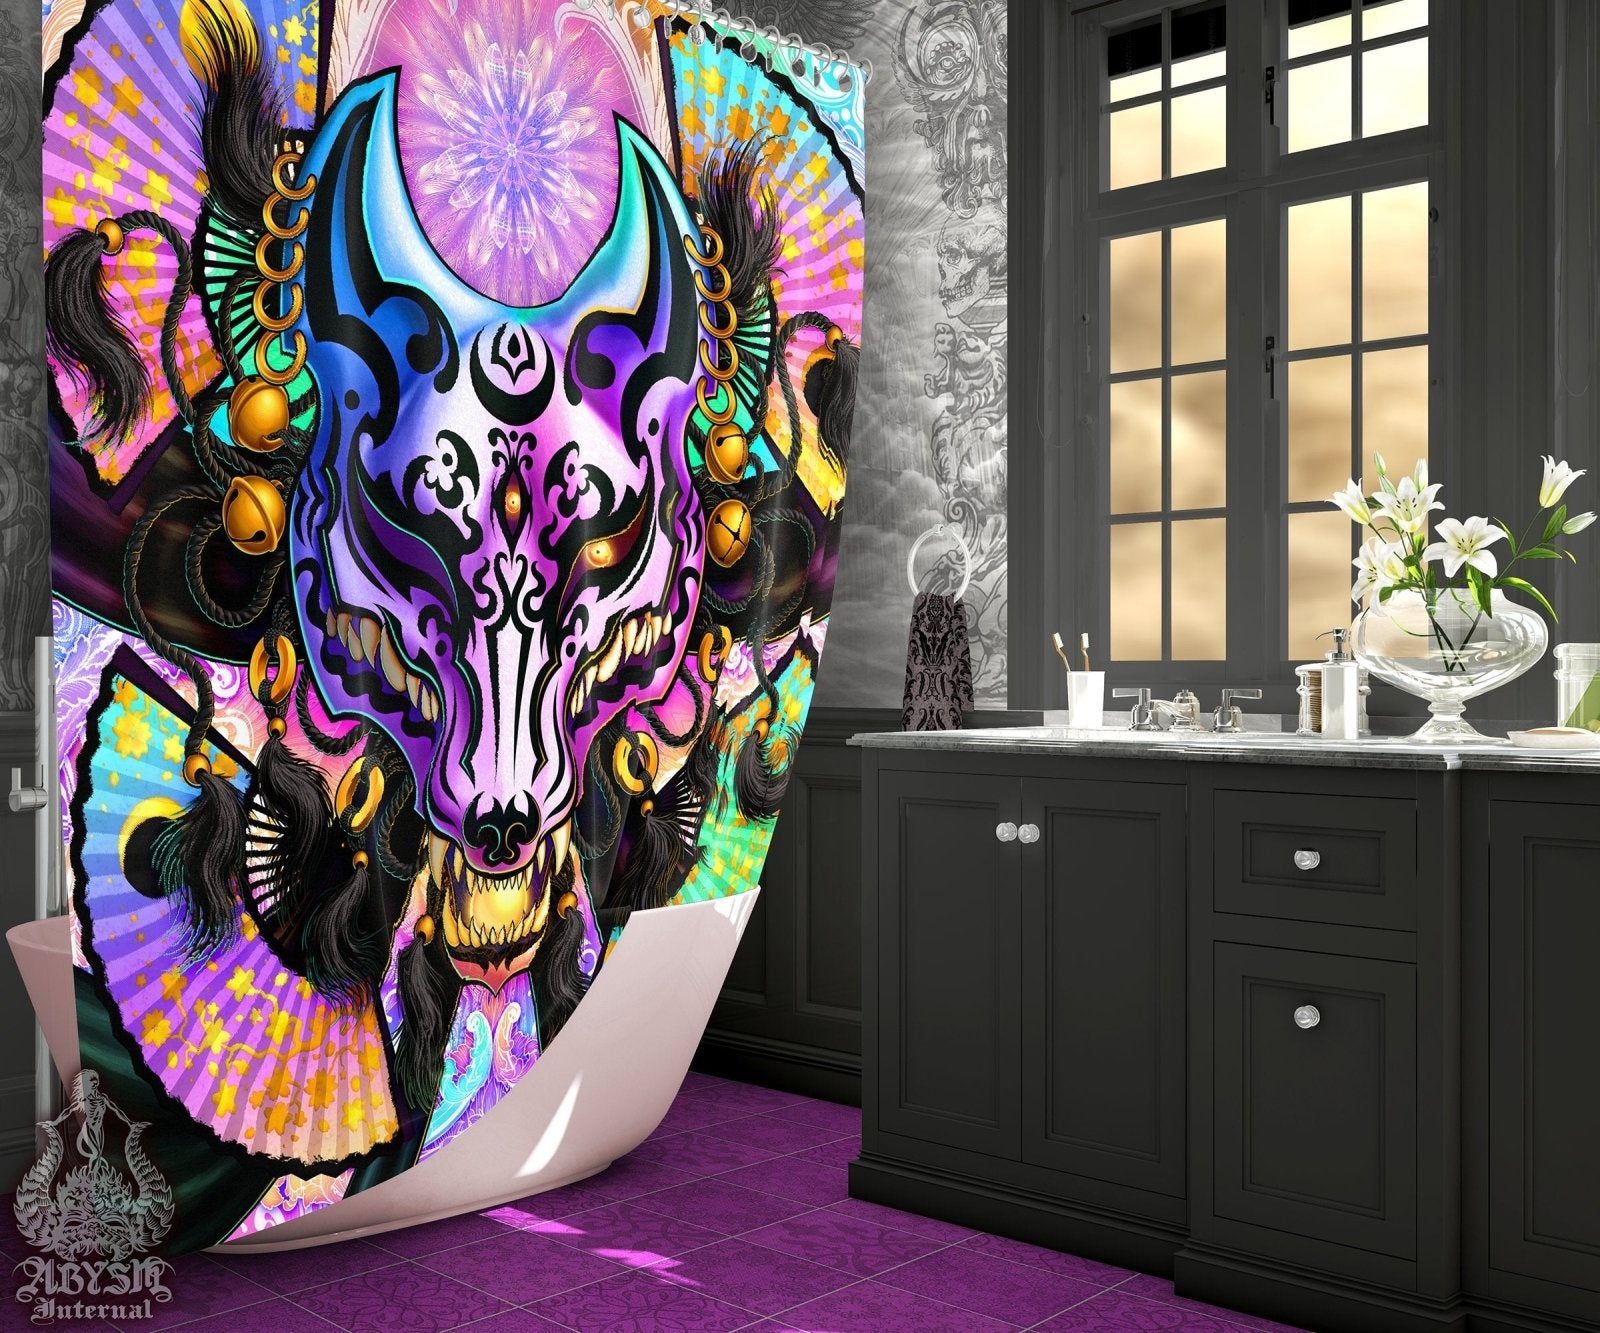 Anime Shower Curtain, Black Kitsune Mask, Okami, Anime Bathroom Decor, Fox Art, Eclectic and Funky Home - Holographic Pastel Punk - Abysm Internal